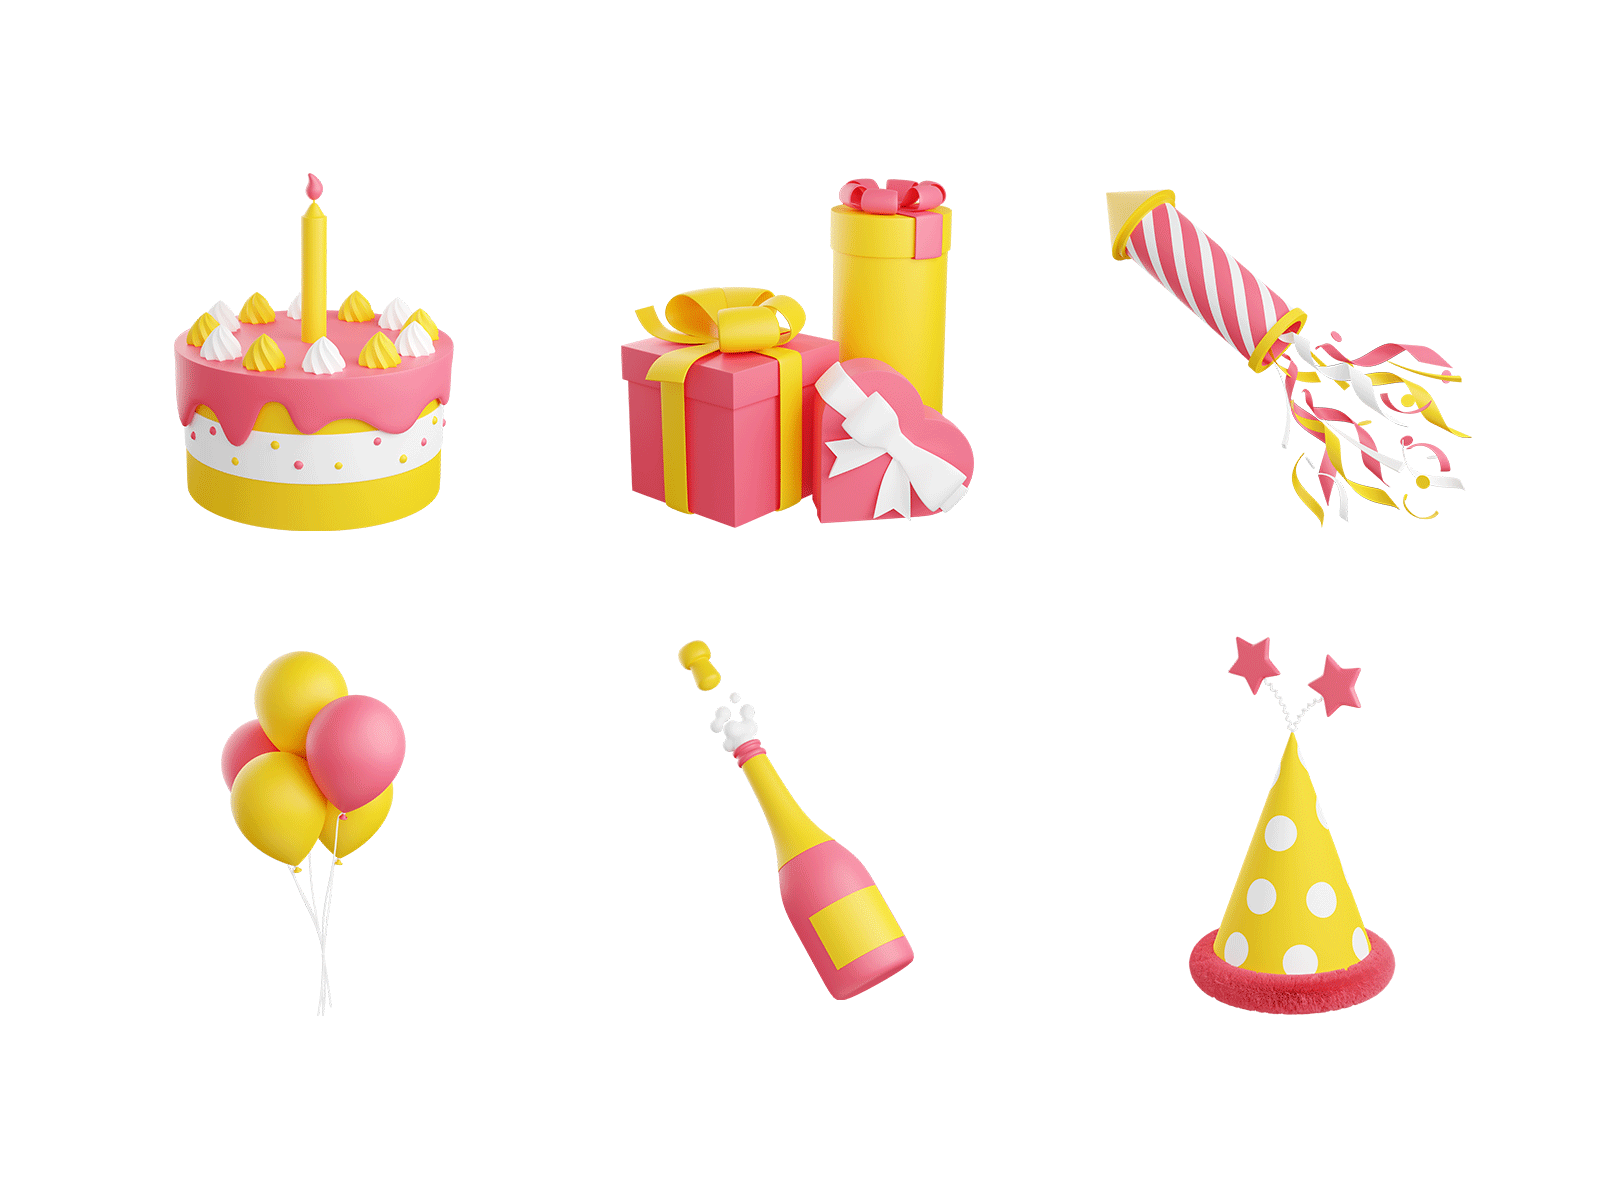 3D Collection: Birthday party 3d 3d art balloon birthday blender cake celebration champagne collection event gift happy hat holiday icon illustration party render salut